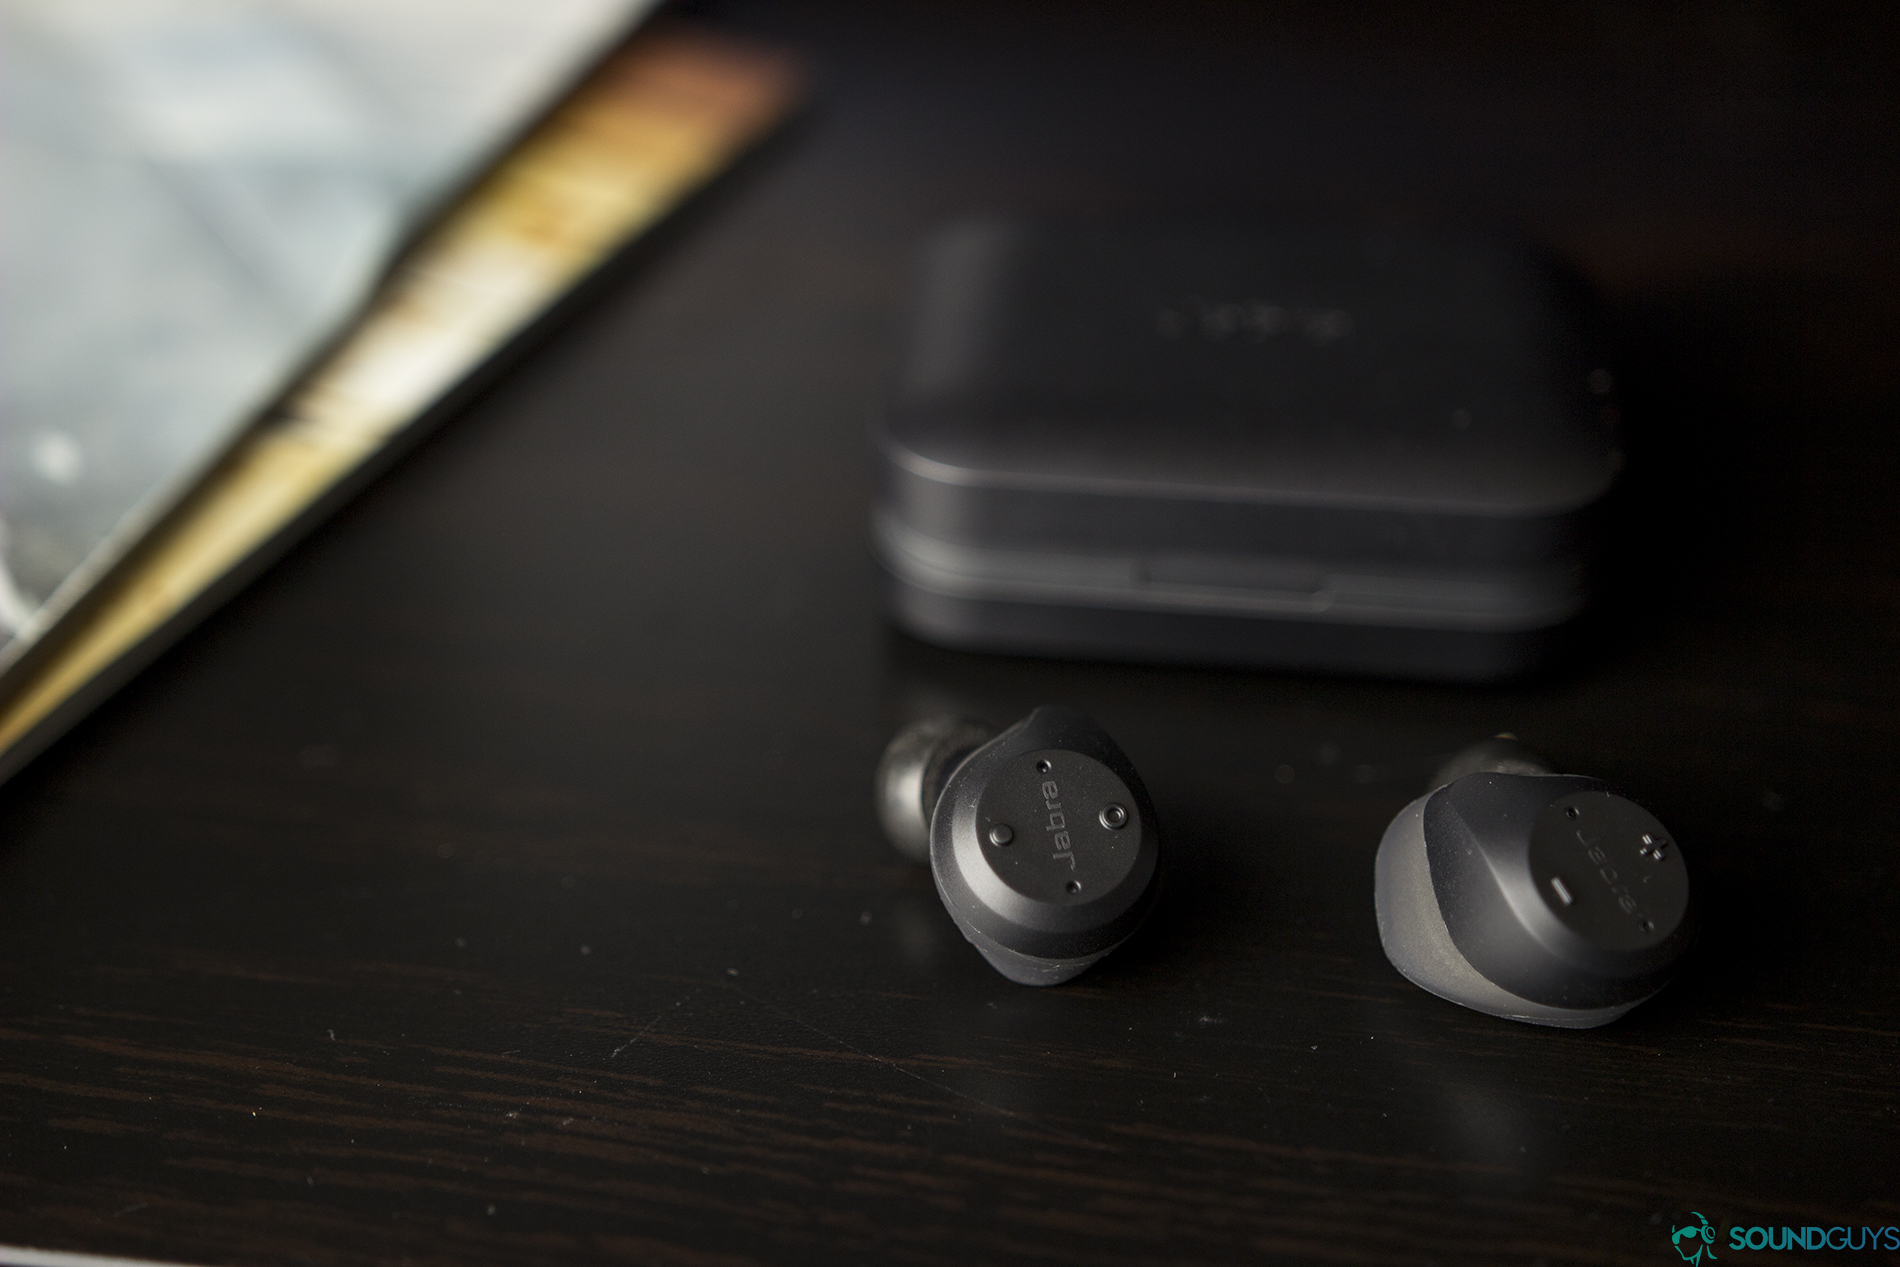 The Jabra Elite 65t heart rate monitor earbuds in front of its charging case.